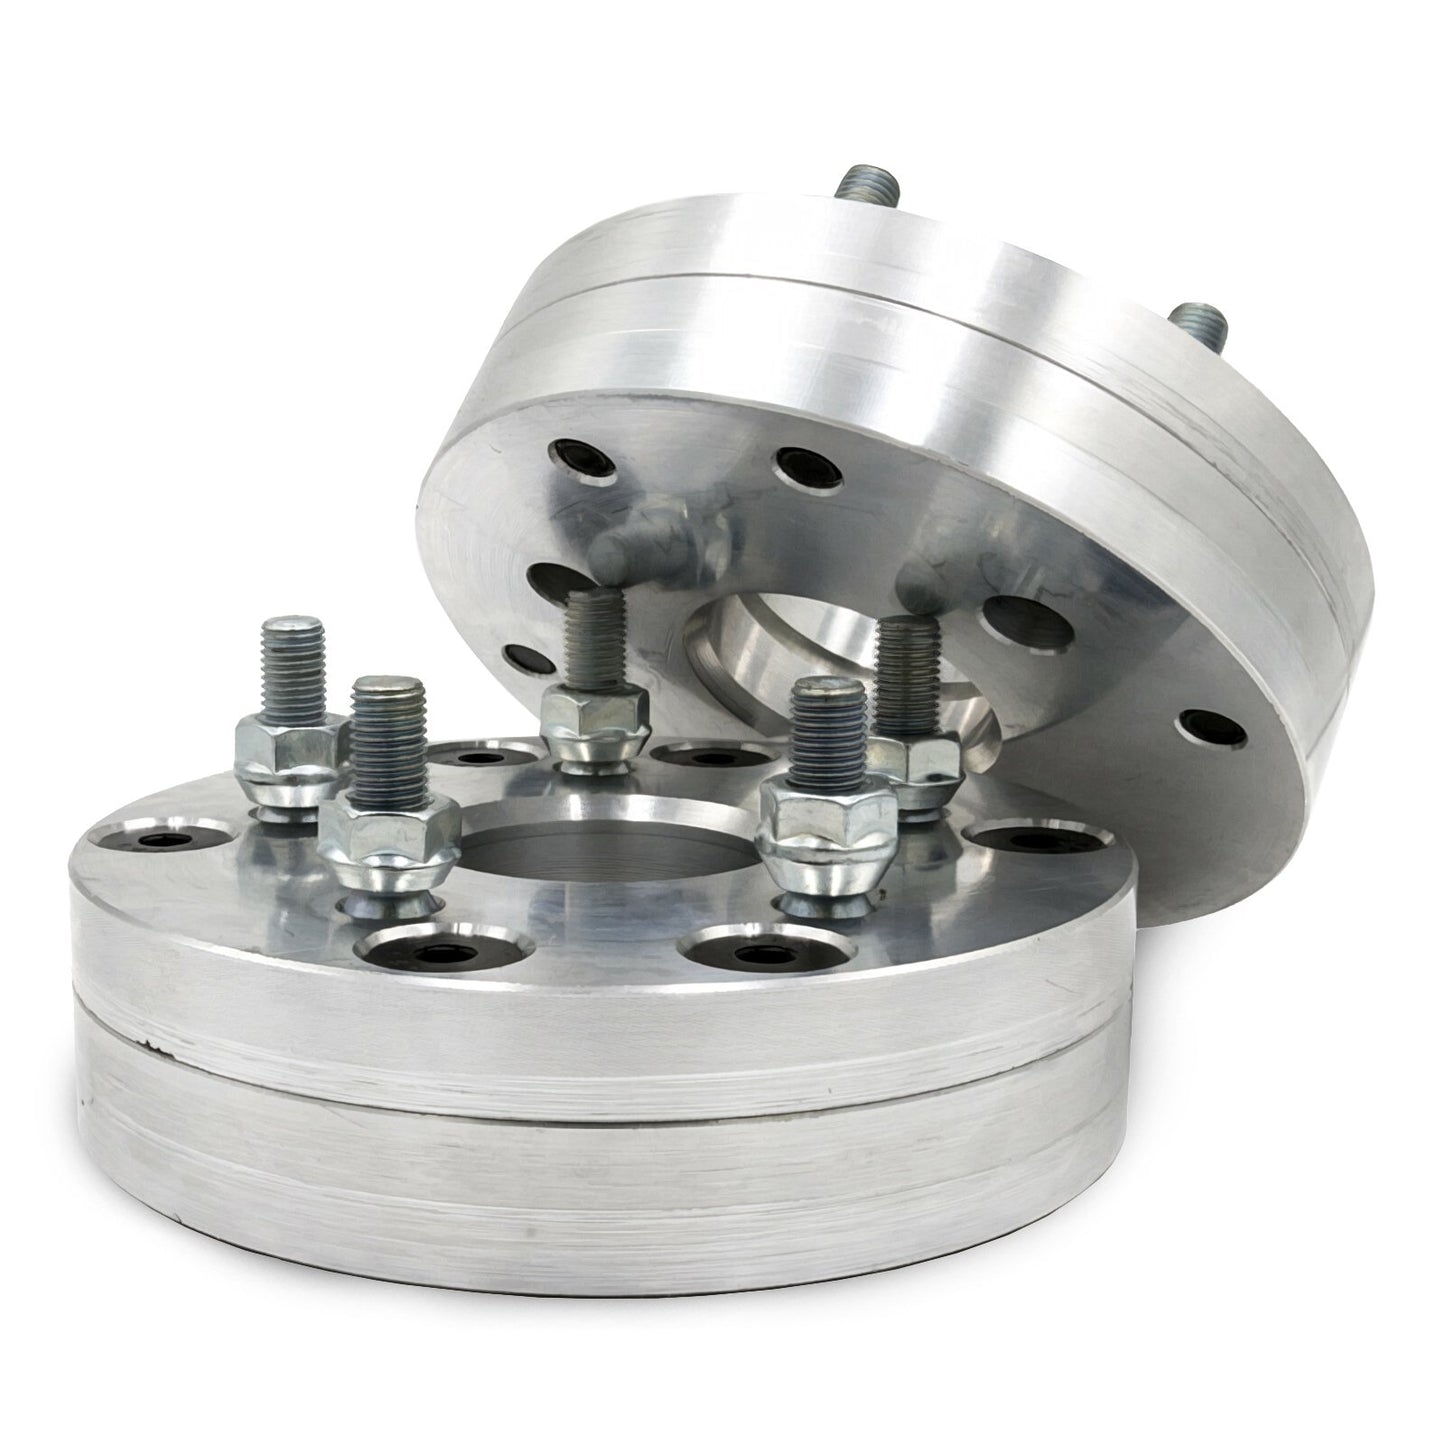 4x110 to 5x110 2 piece Wheel Adapter - Thickness: 1.5" - 3"